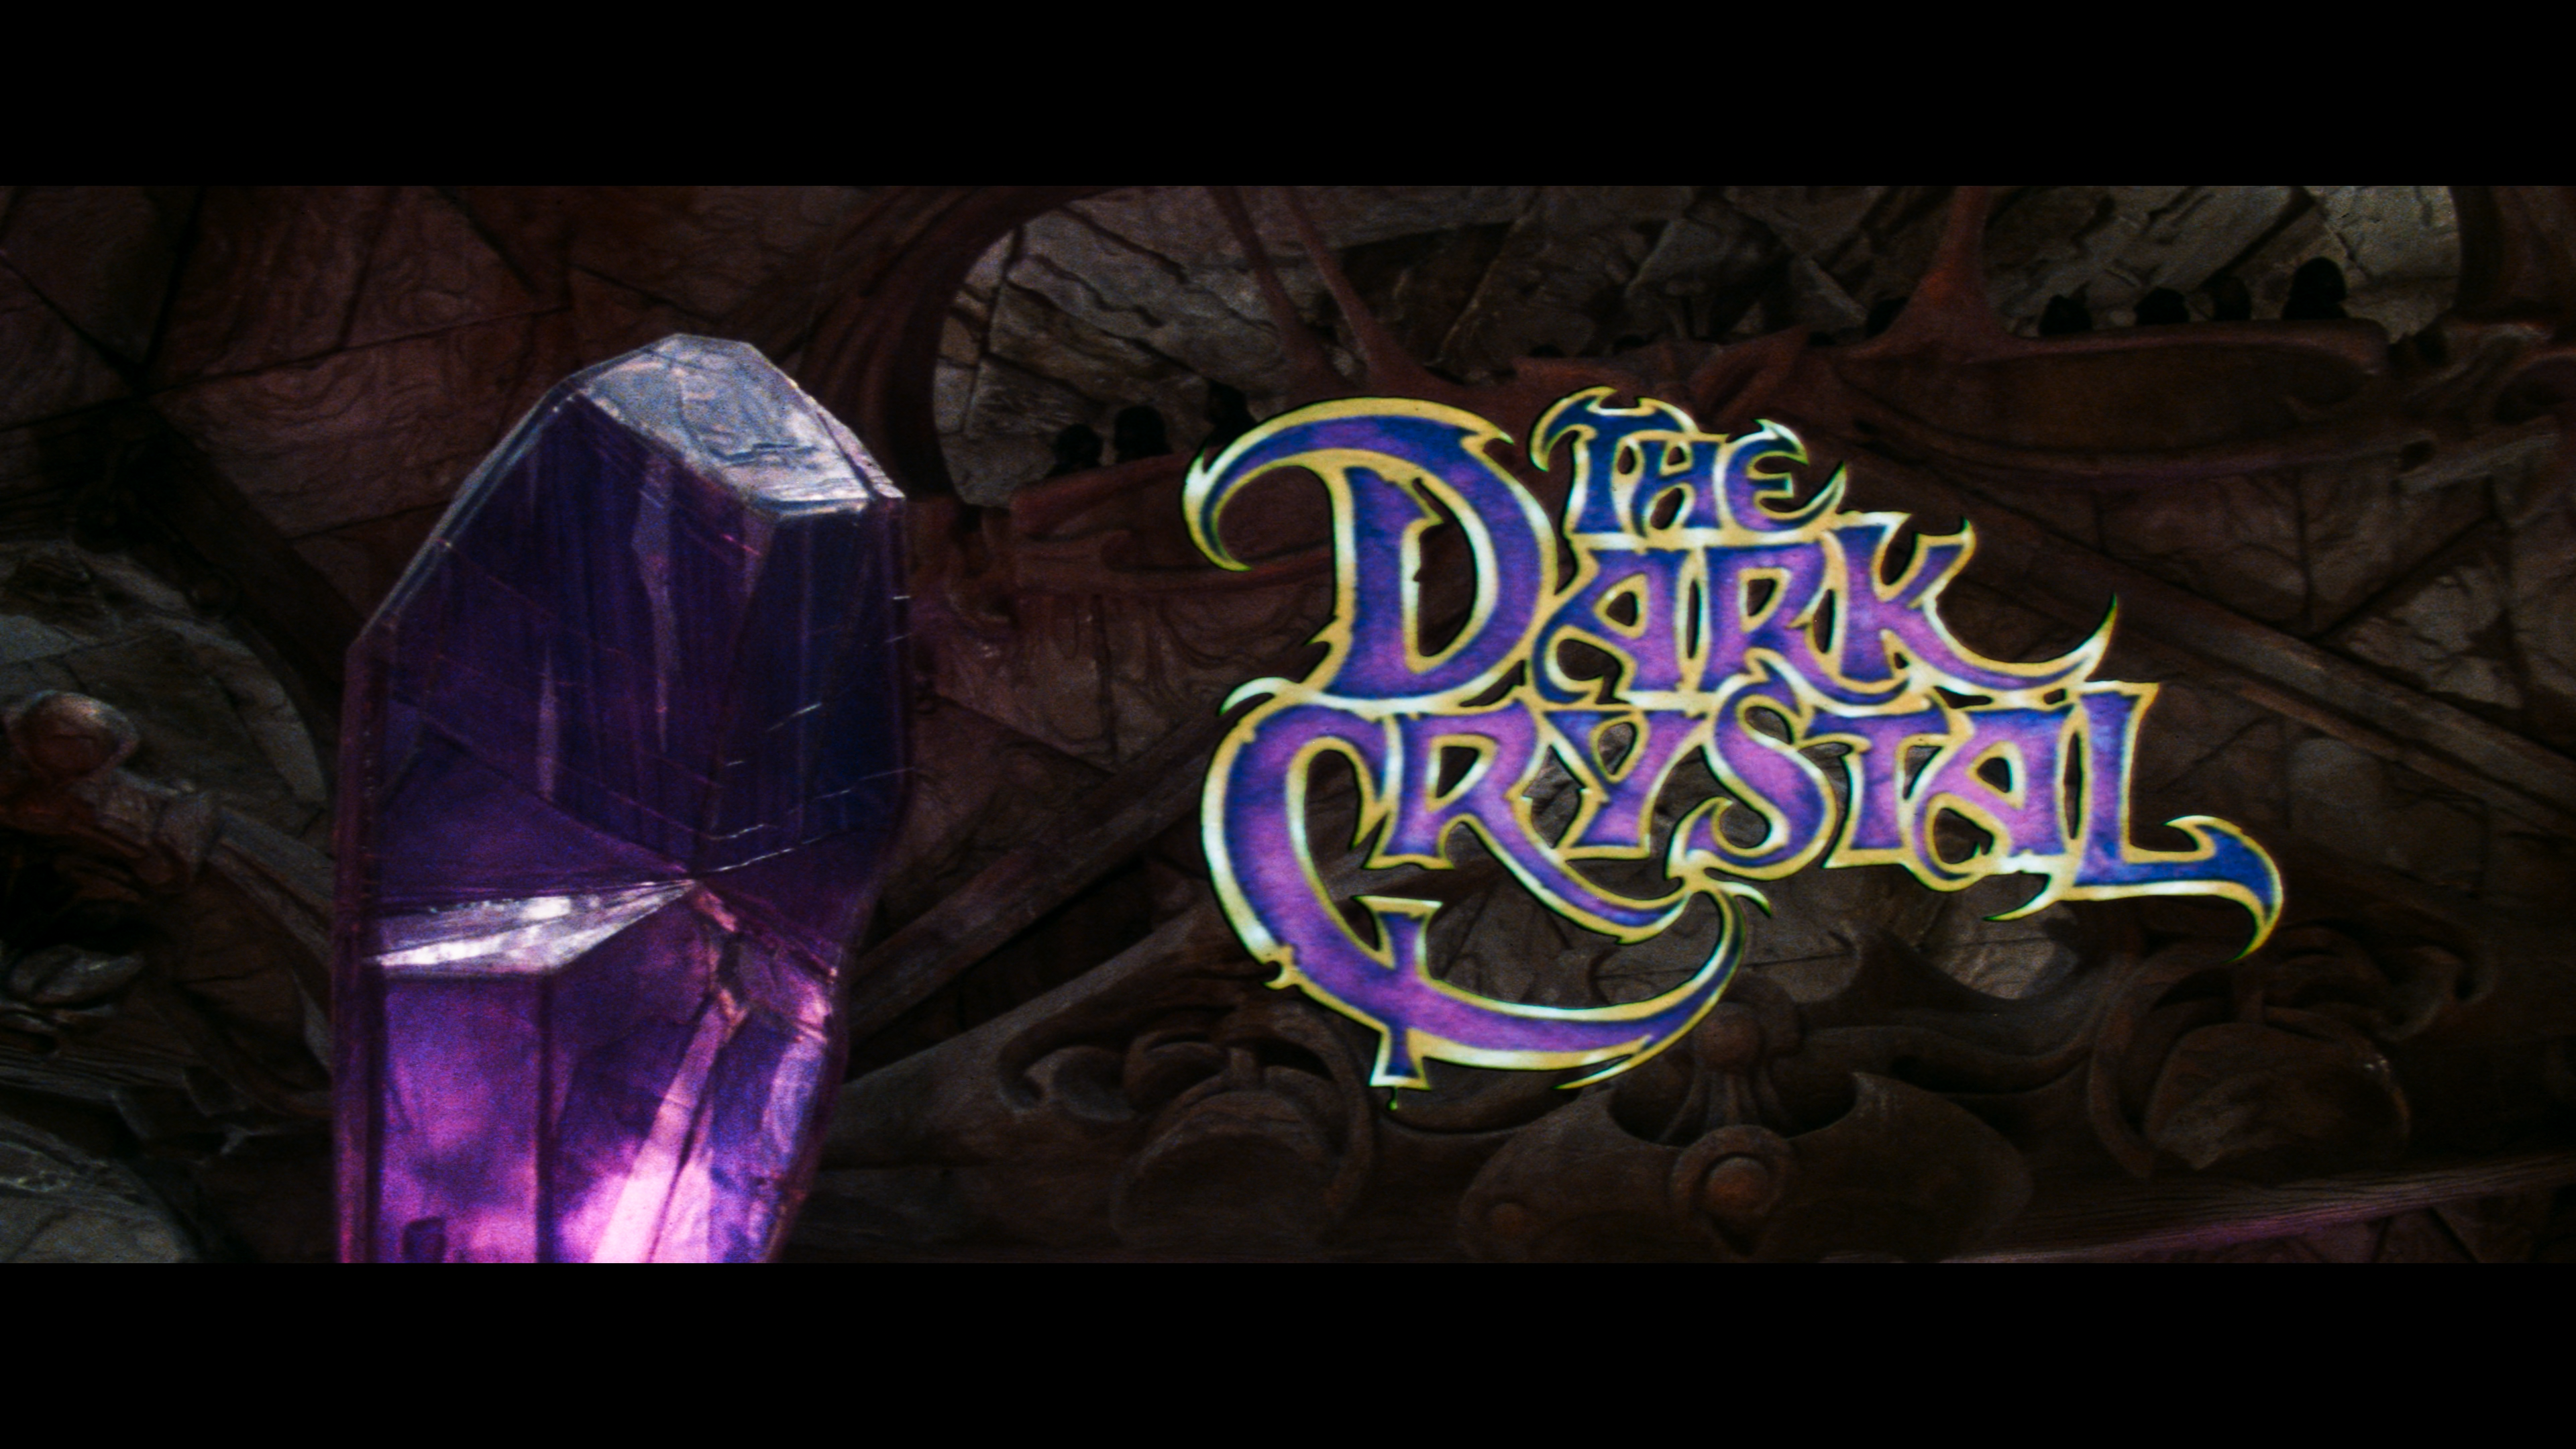 The crystal 4